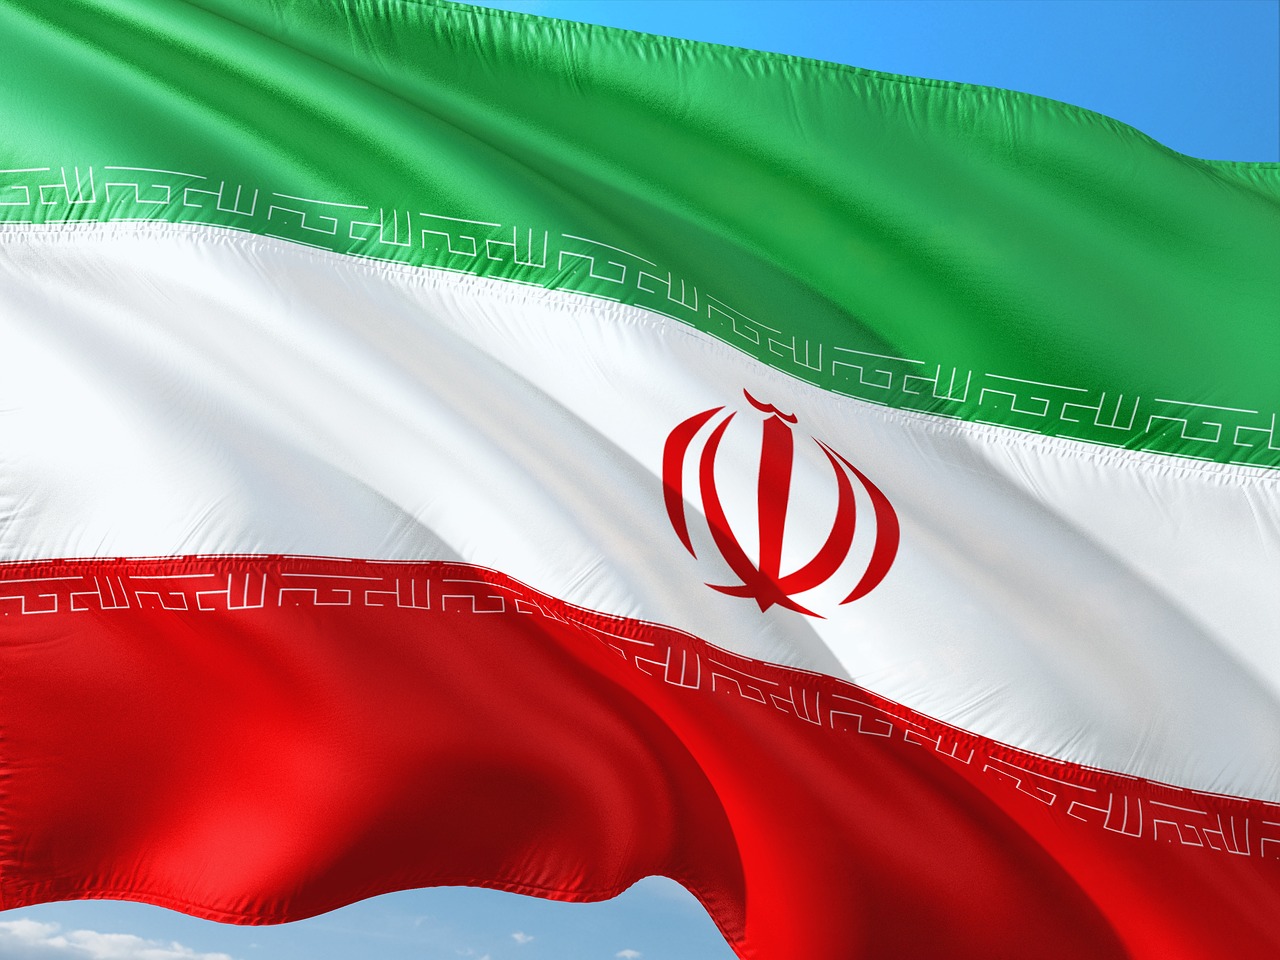 Nevada resident charged with exporting electronics to Iran in violation of sanctions